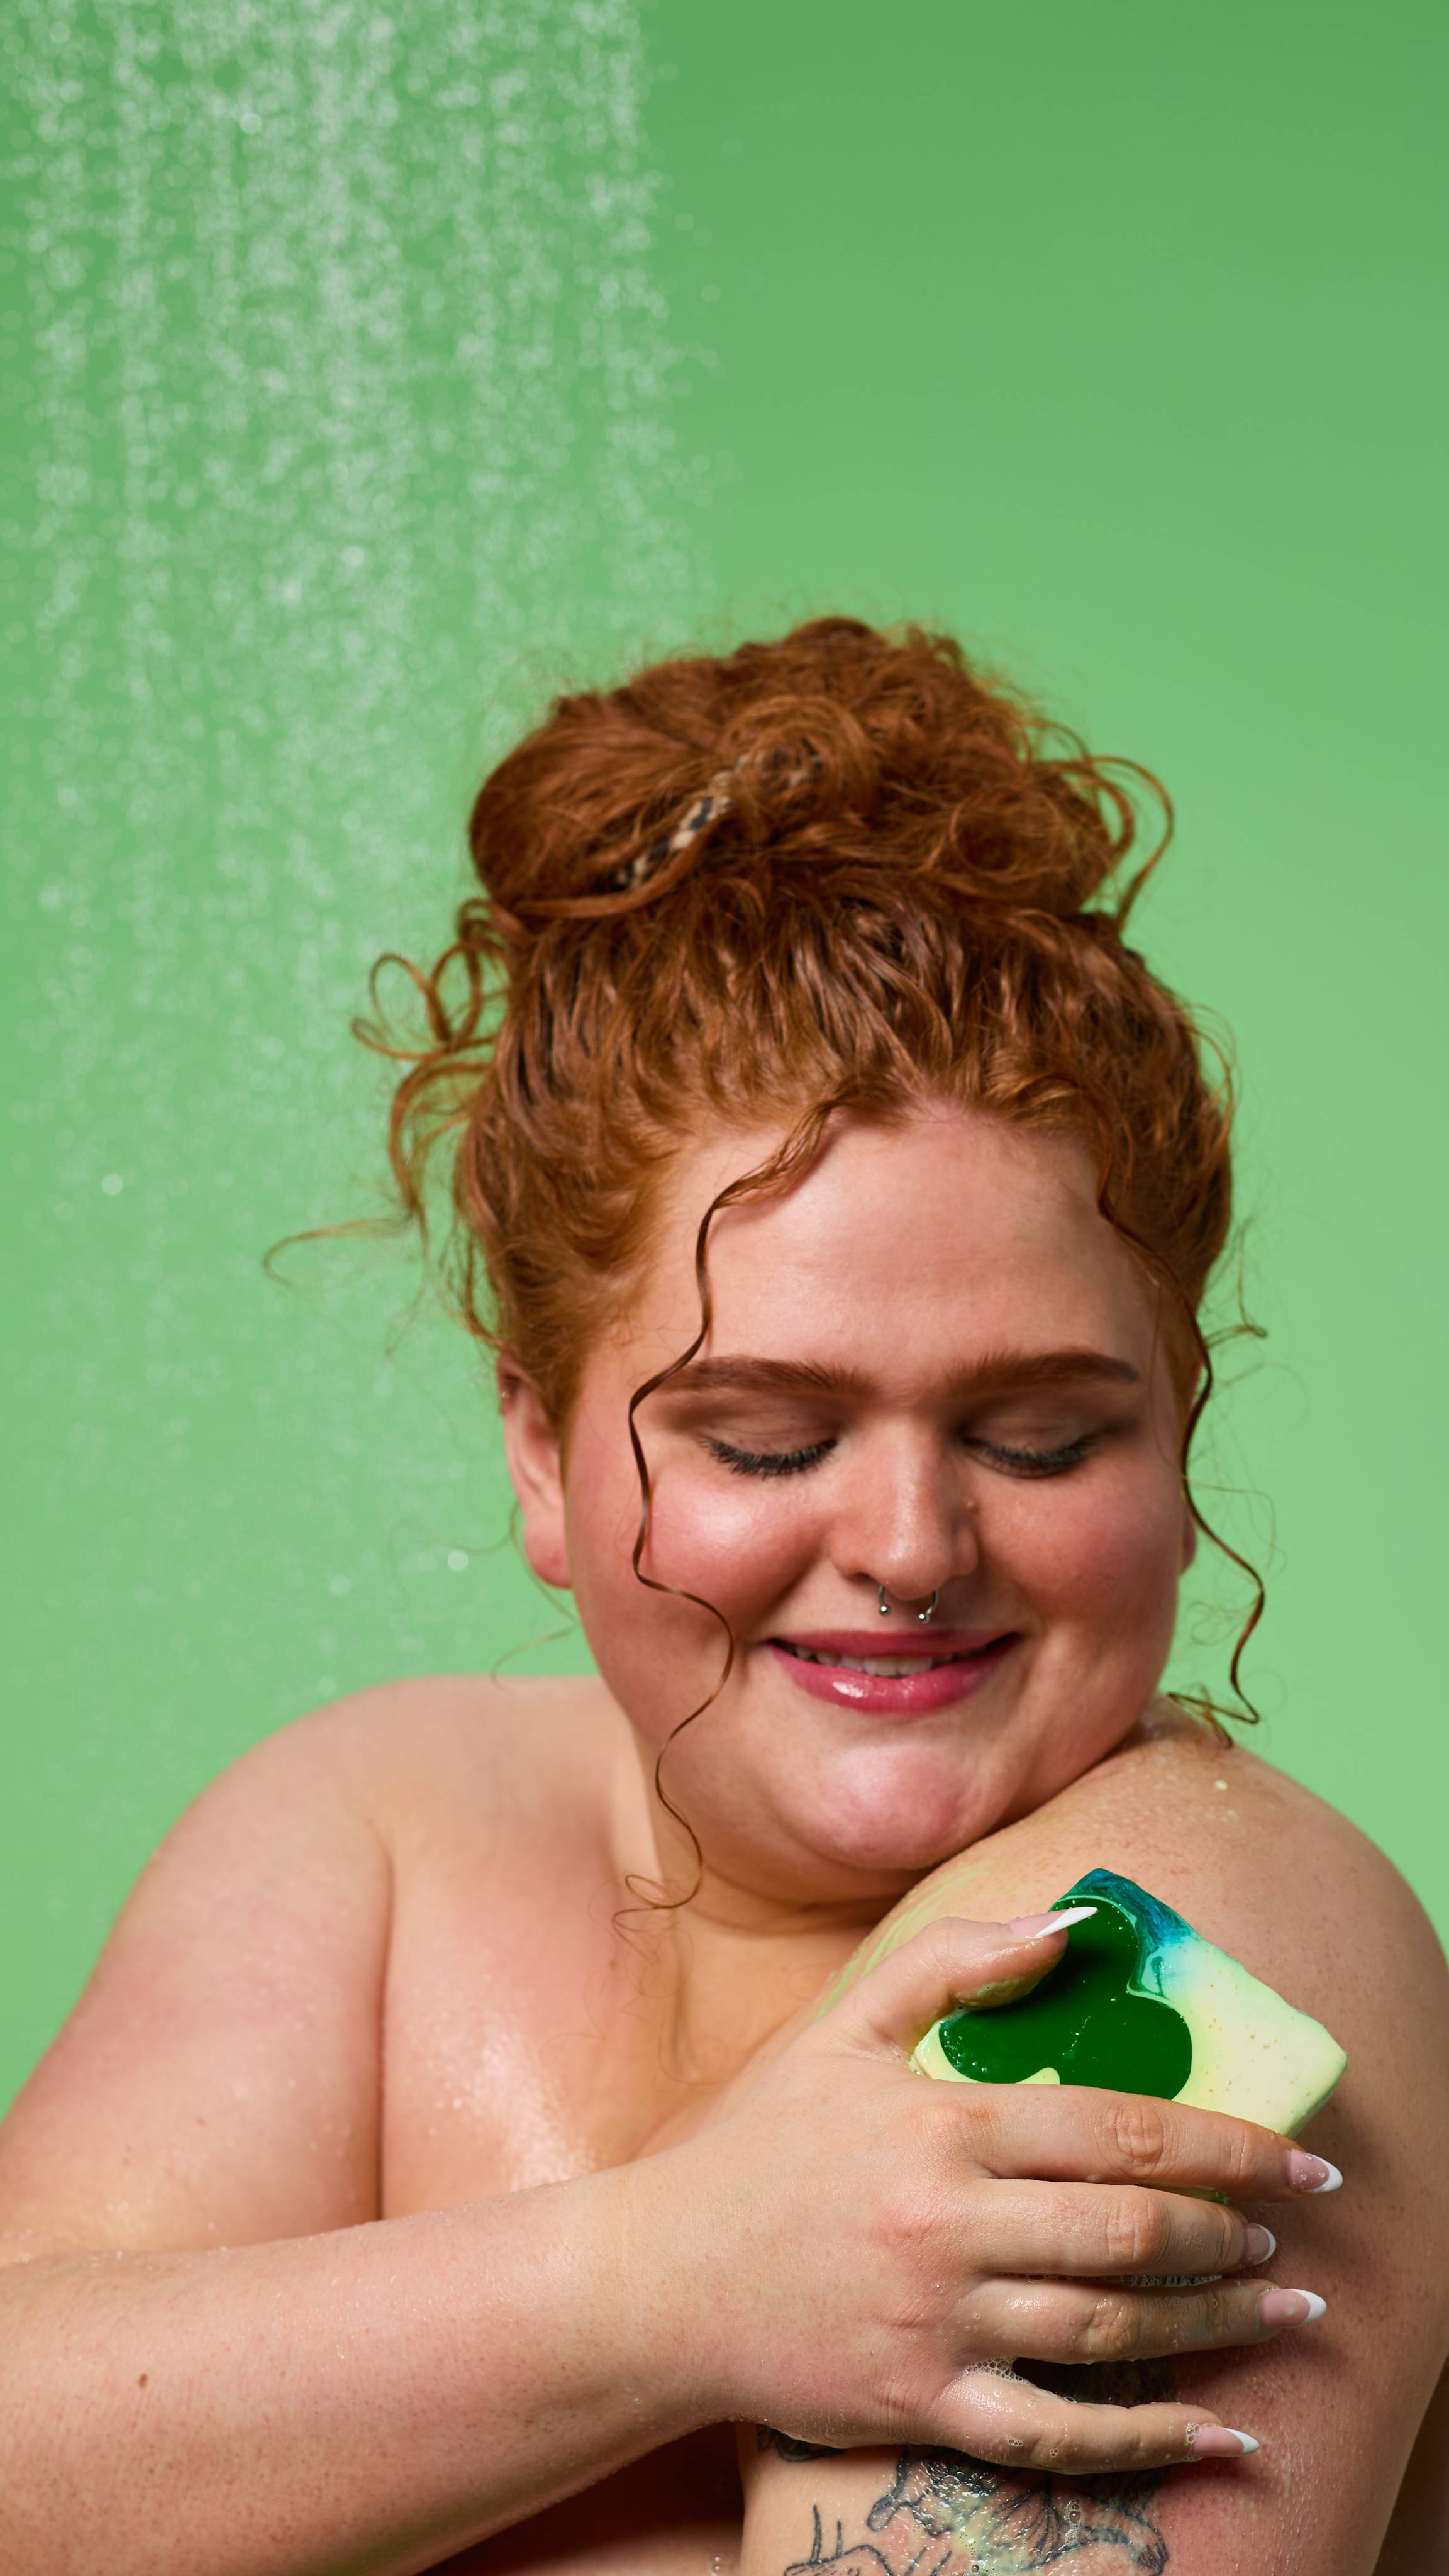 The model is standing under running shower water on a pale green background. Their curly hair is tied up as they lather their shoulder with the Alban Eilir soap. 